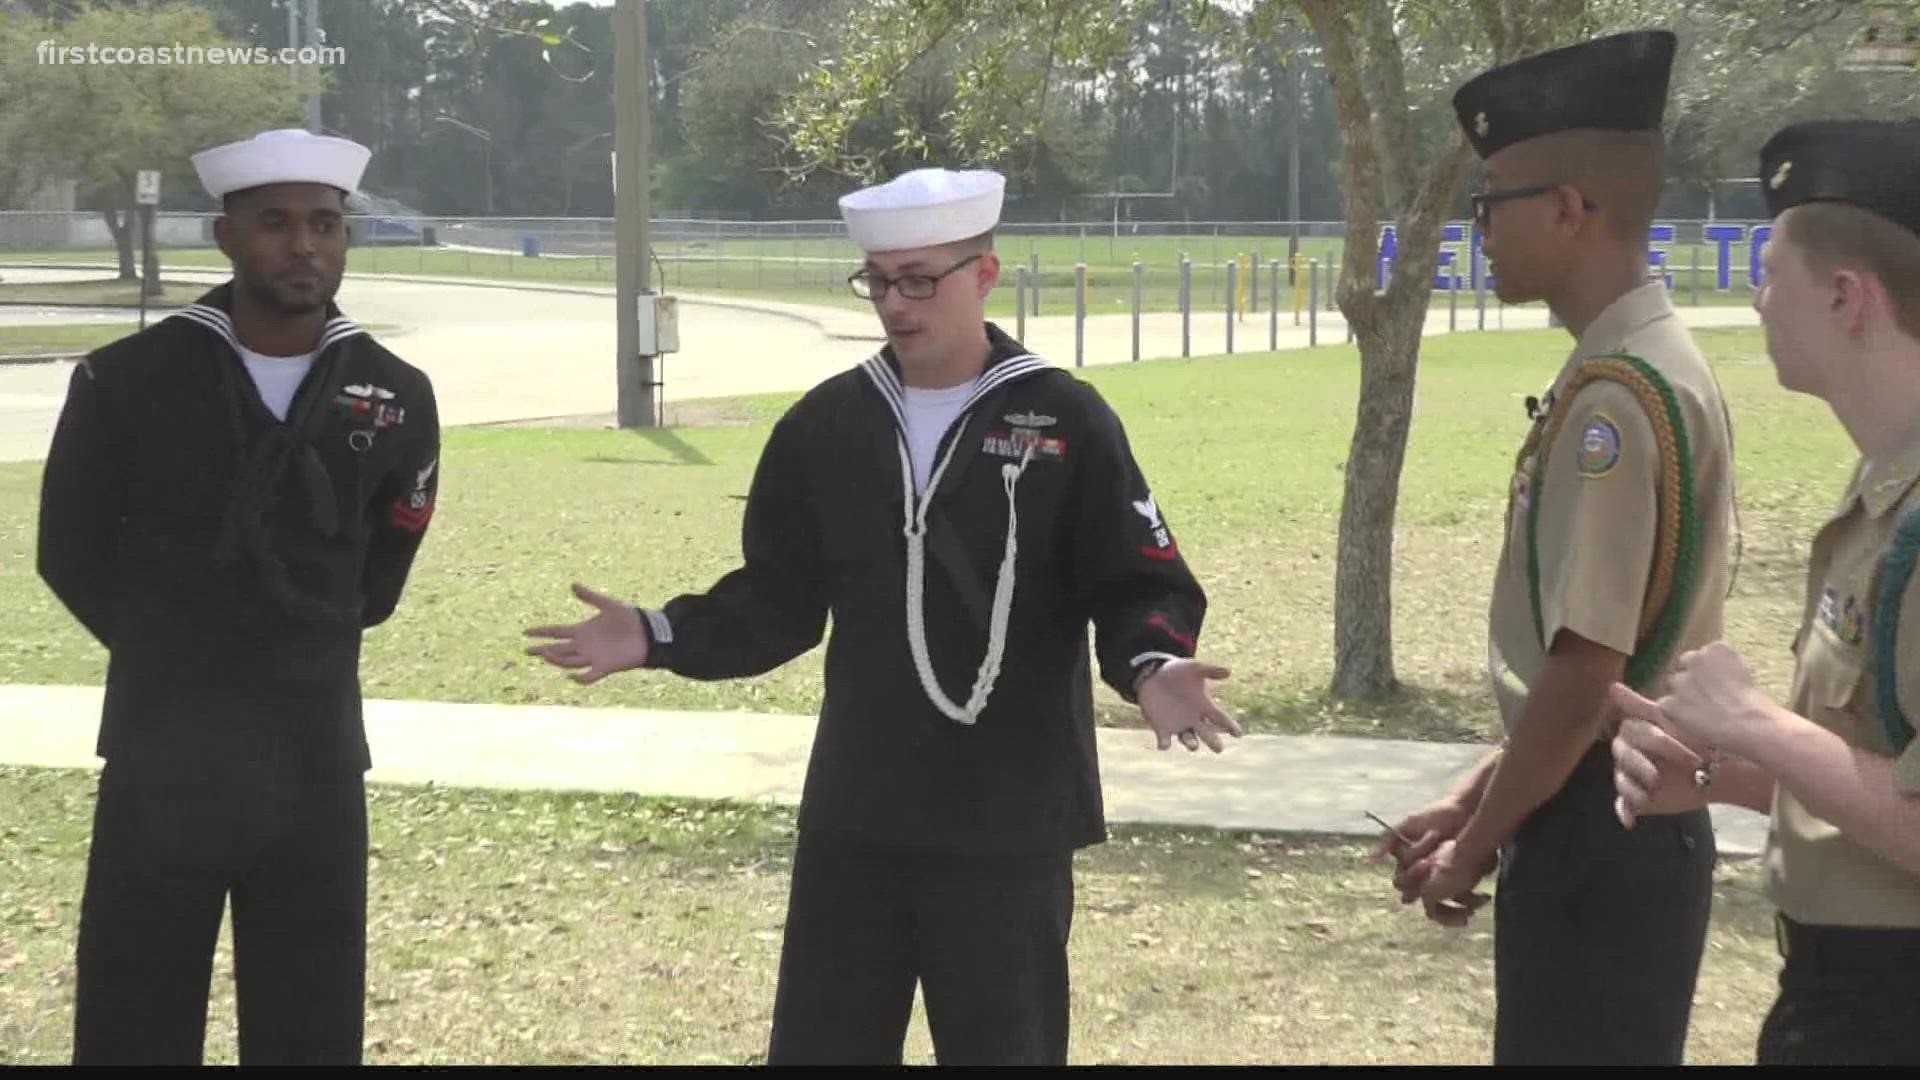 Students in the JROTC program at First Coast High School get a lesson on being a Boatswain from sailors stationed at Mayport.